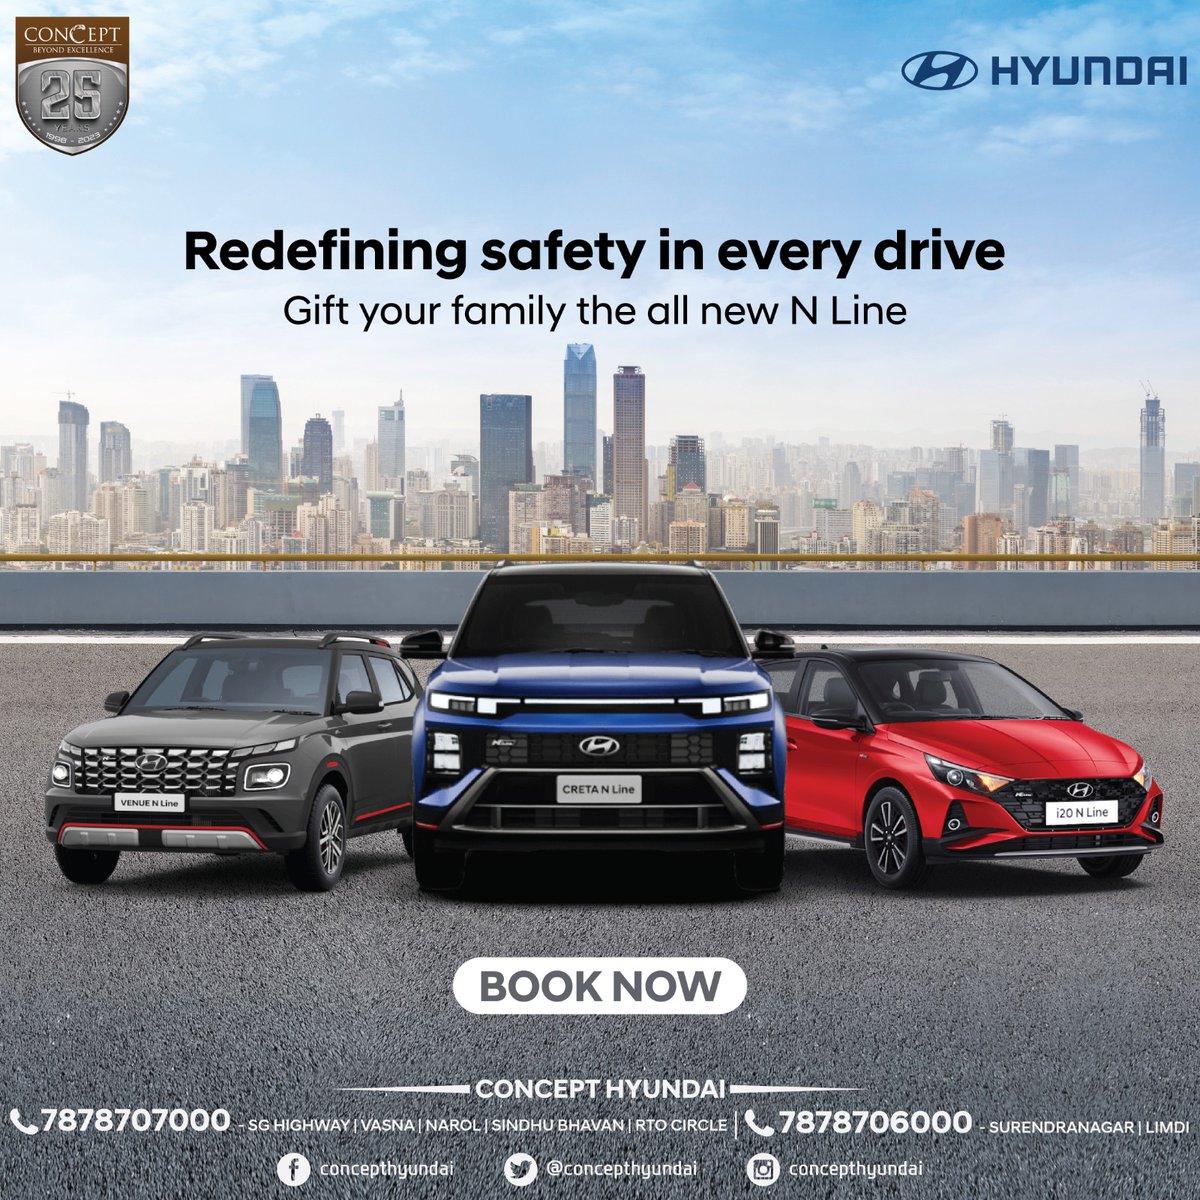 Feel the rush of 𝐇𝐲𝐮𝐧𝐝𝐚𝐢 𝐍 𝐋𝐢𝐧𝐞 - where every drive is an adventure with powerful performance & stylish design with N line - Feel the Drive with Experience Today!

#ConceptHyundai #ConceptGroup #HyundaiNLine #NLine #HyundaiCRETANLine #VENUENLine #i20NLine #BookNow